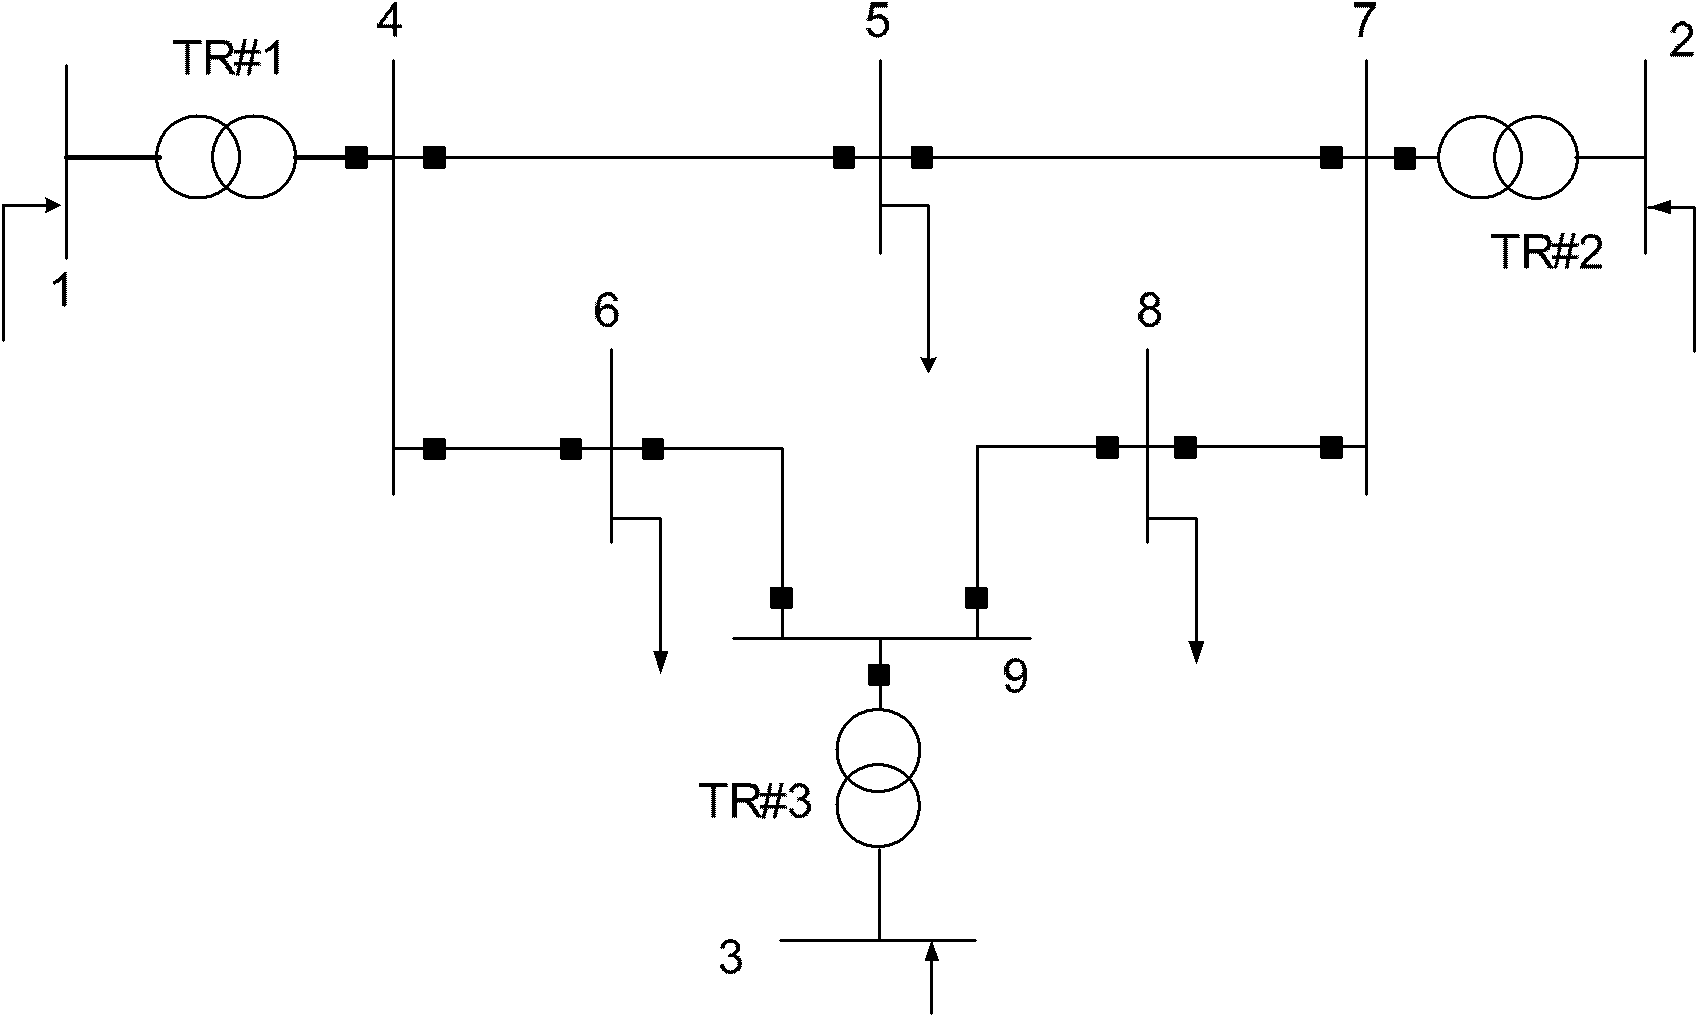 Zero-injection-constraint electric power system state estimation method based on modified Newton method